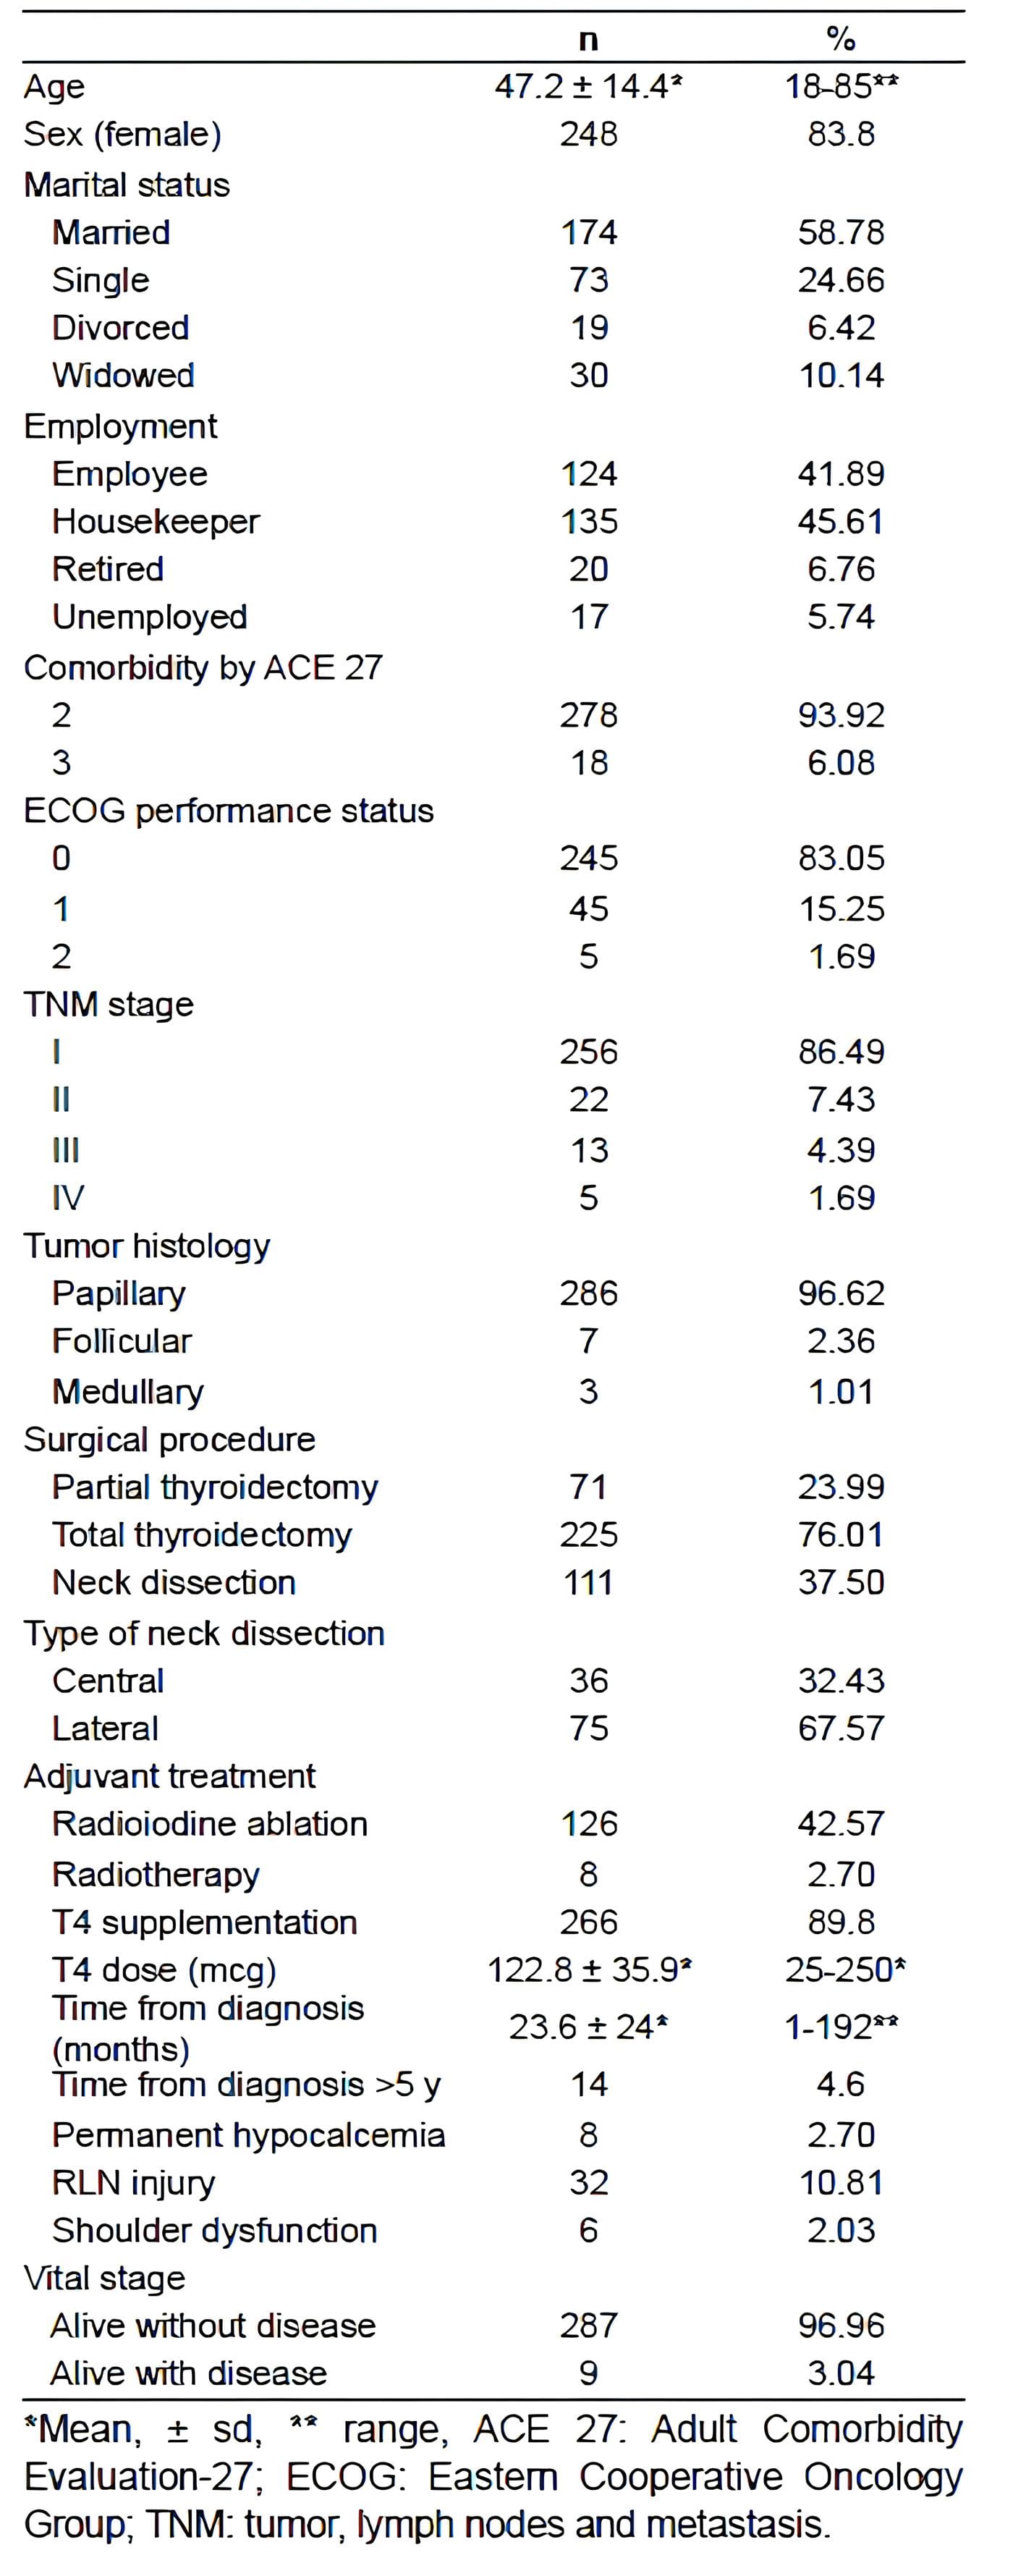 Demographic and clinical characteristics of the cohort of patients with thyroid cancer